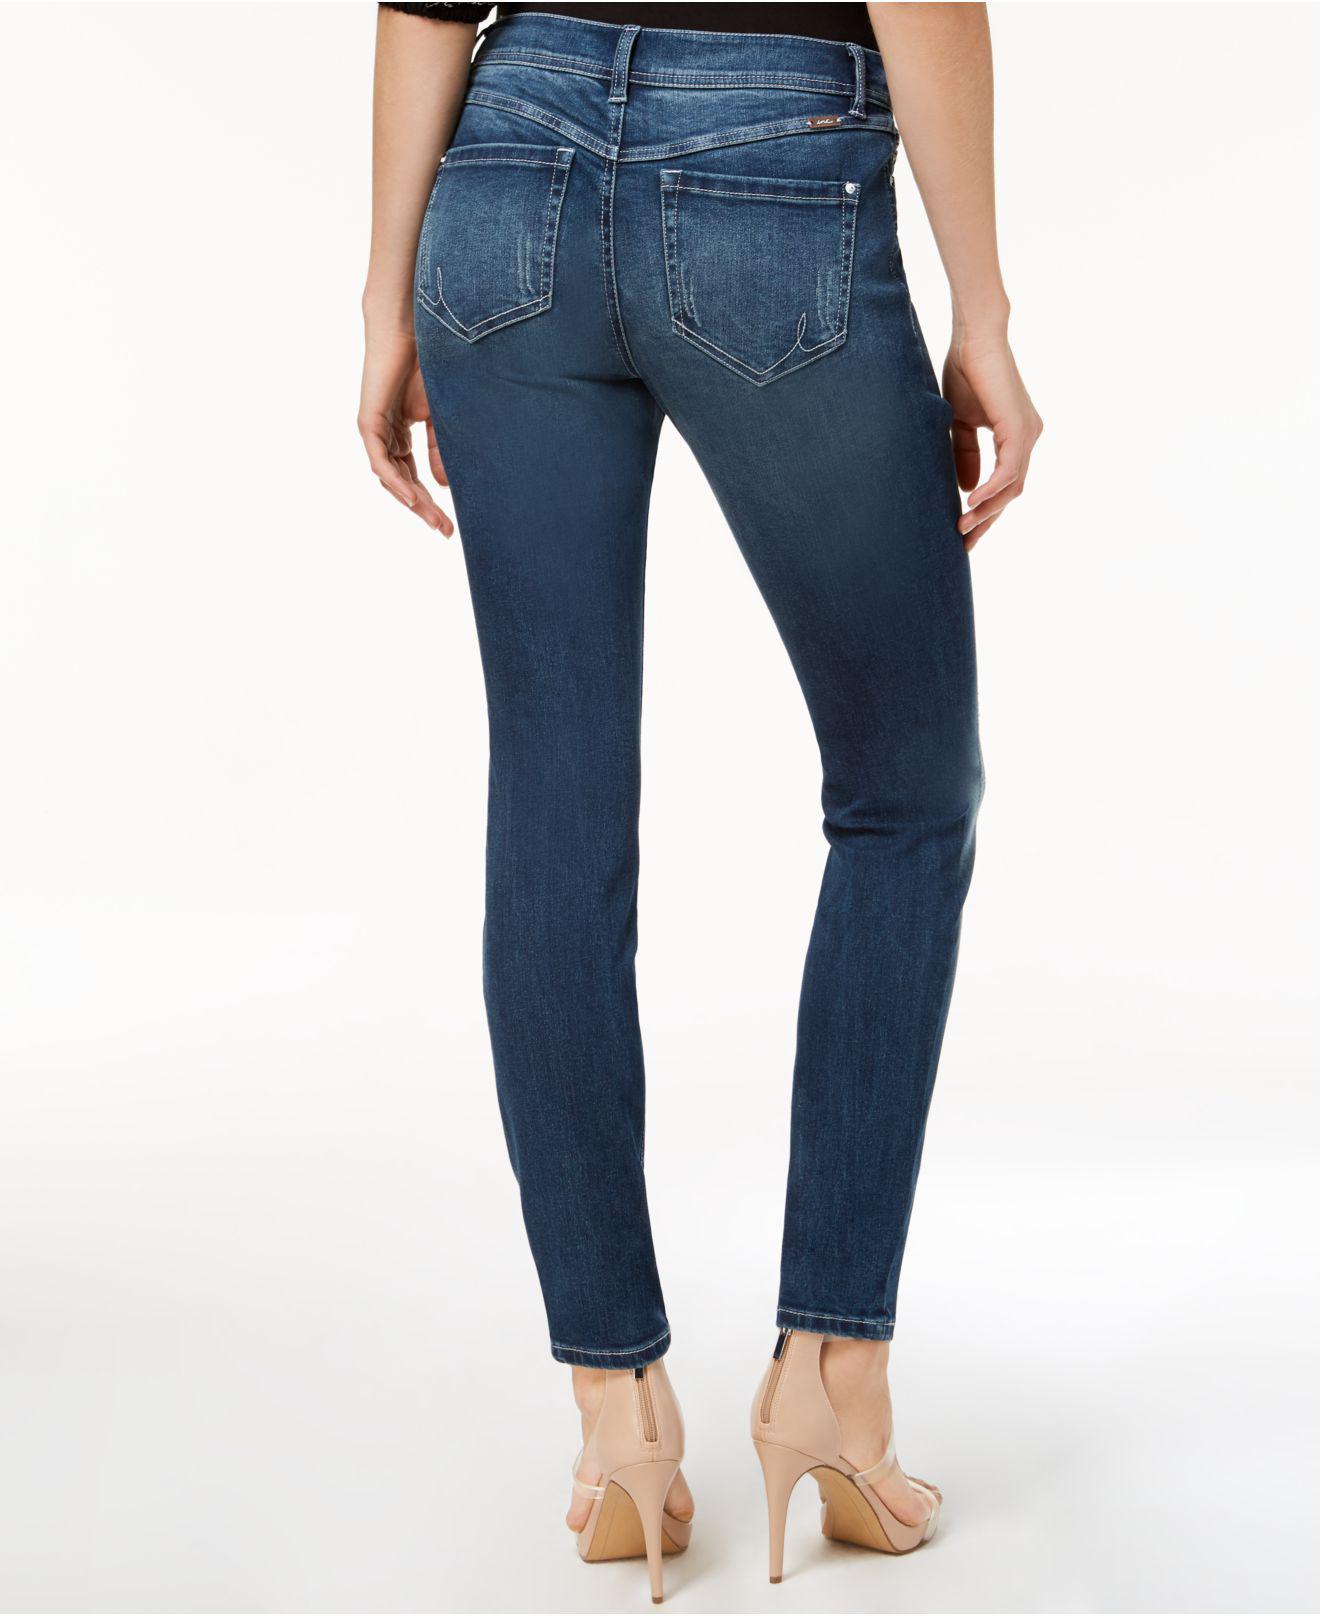 Lyst - Inc International Concepts Medium Wash Skinny Jeans, Created For ...